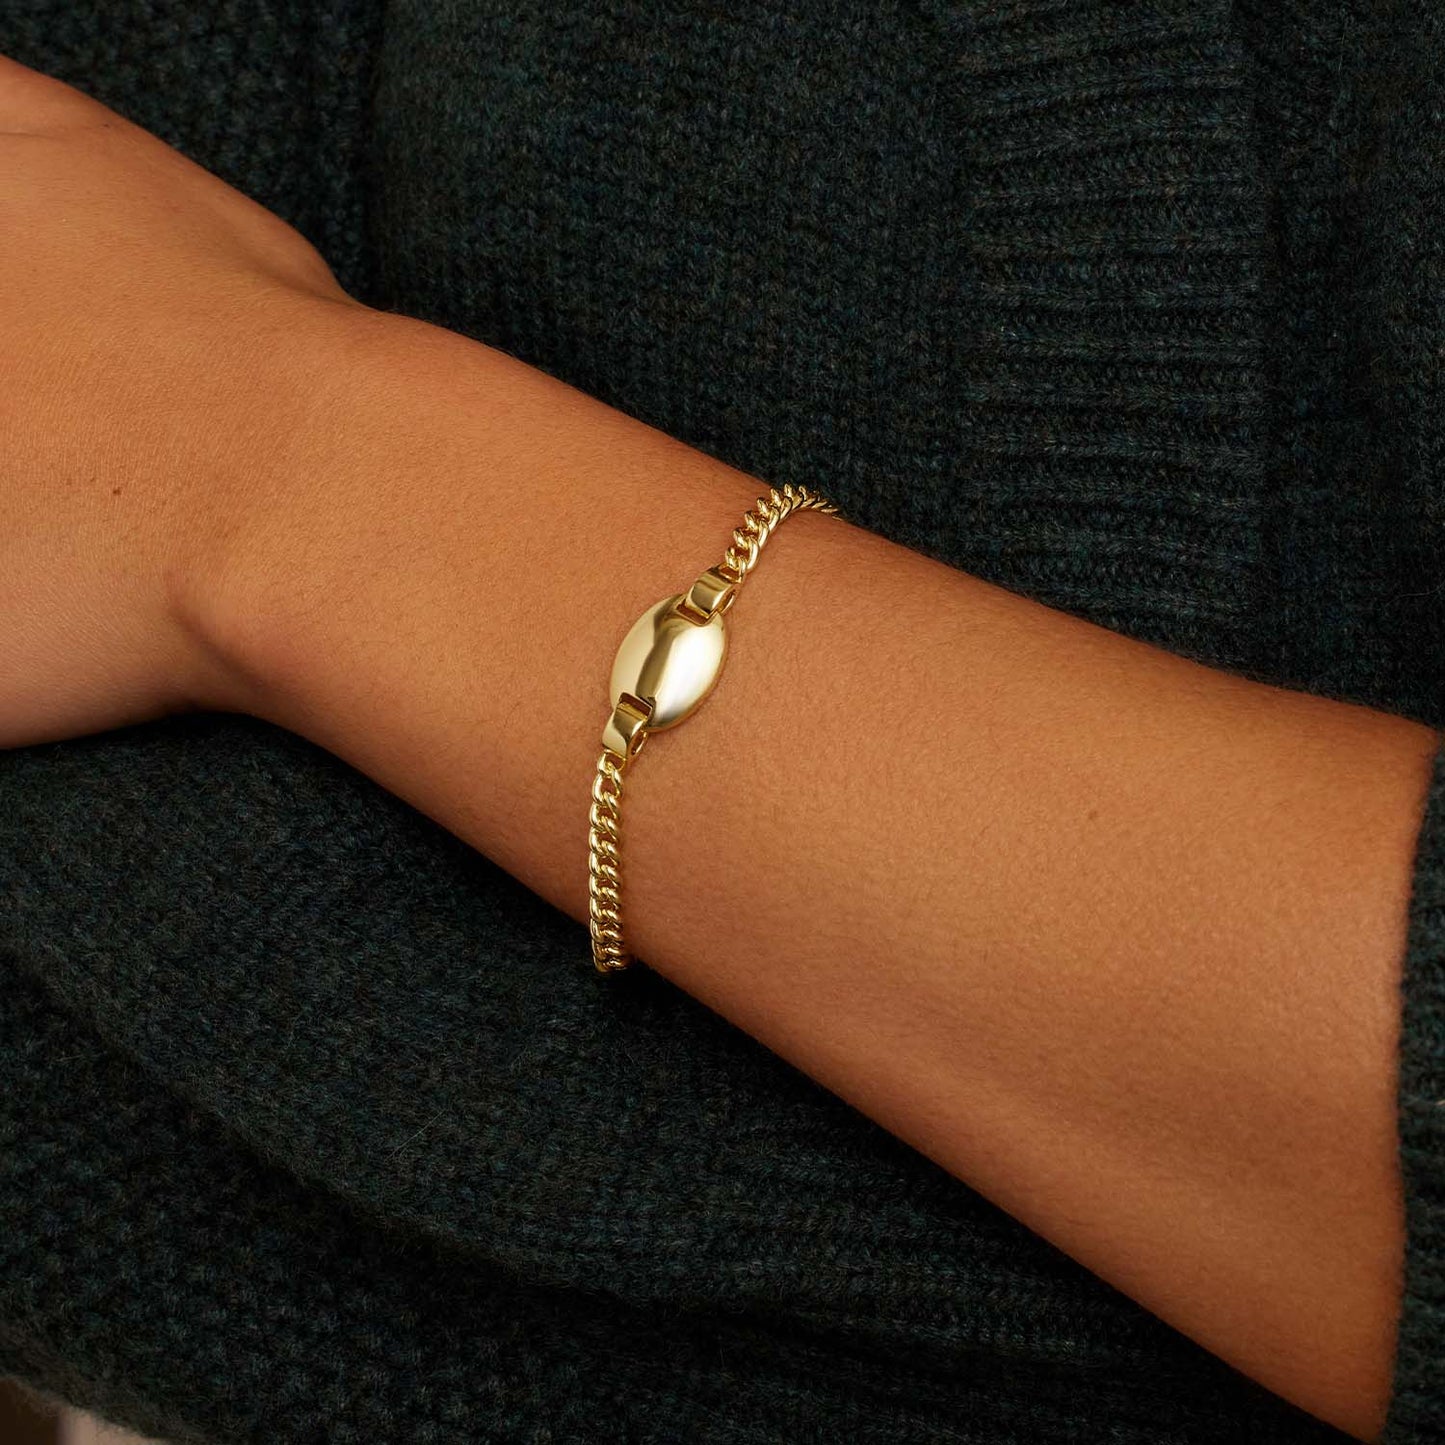 The Lou Tag Bracelet features a modern link crafted from 18k gold plated brass and a statement tag charm, designed and crafted by the Californian designer, Gorjana. This luxurious bracelet is connected with a reliable clasp, made to provide lasting quality with a modern, chic aesthetic.